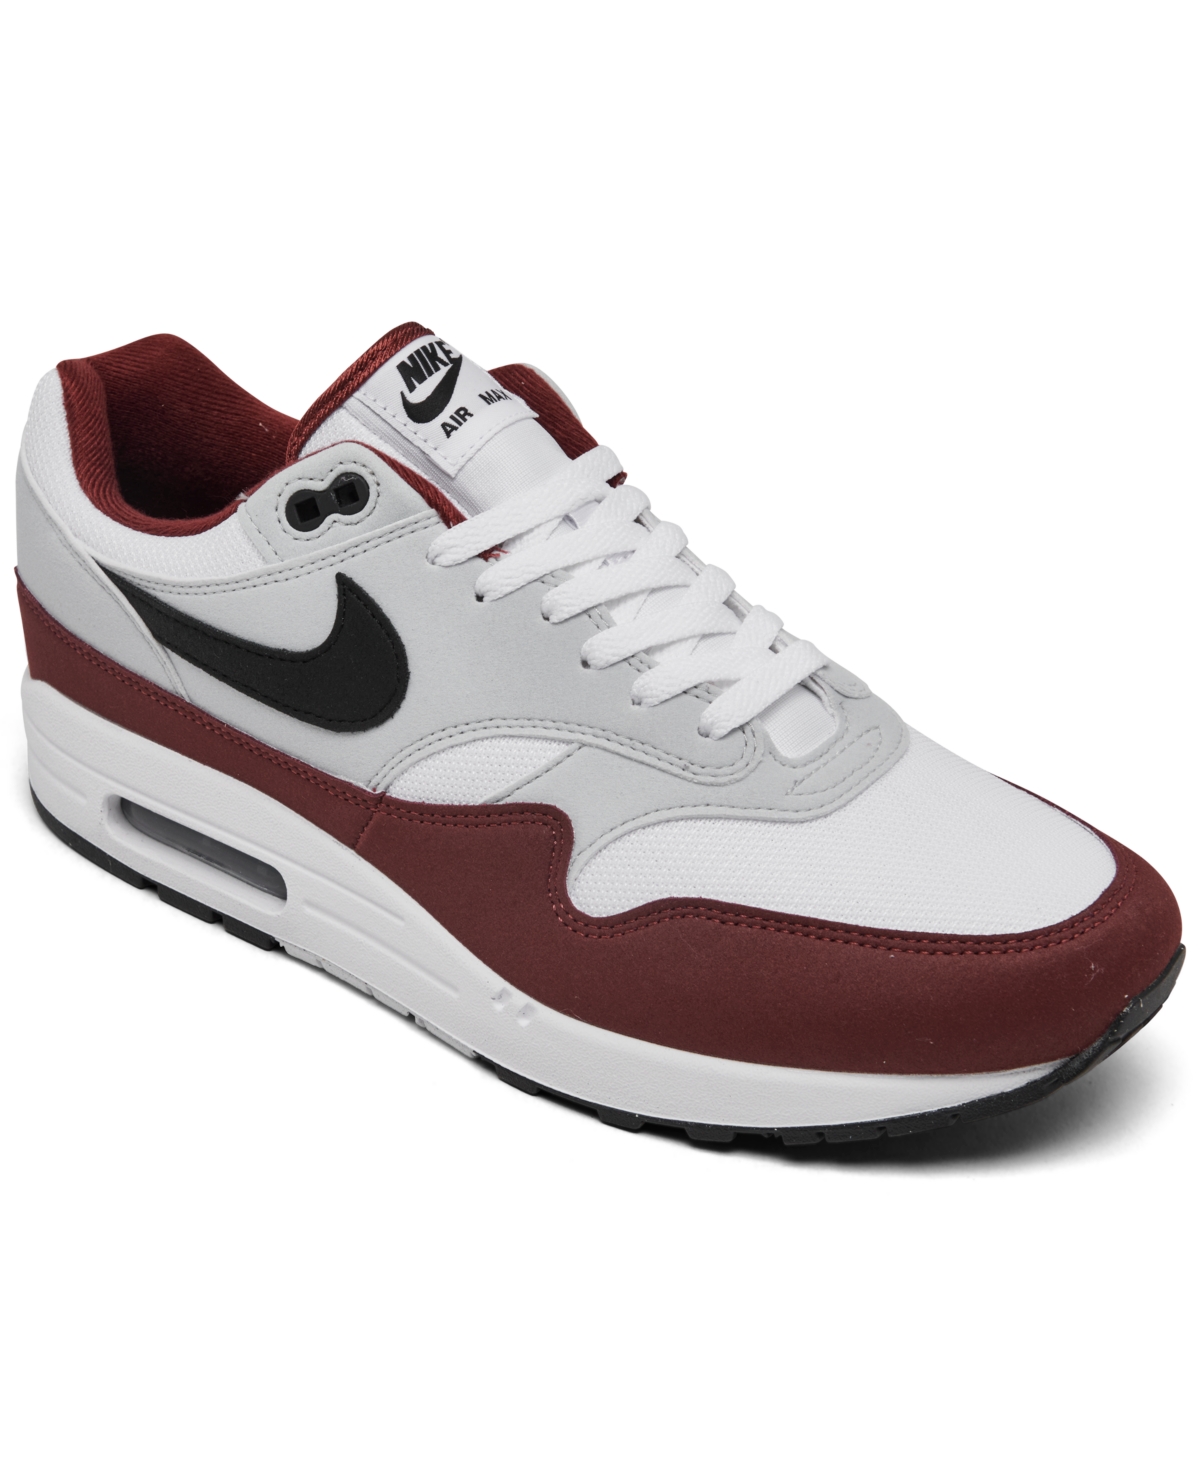 Men's Air Max 1 Casual Sneakers from Finish Line - White, Black, Dark Red